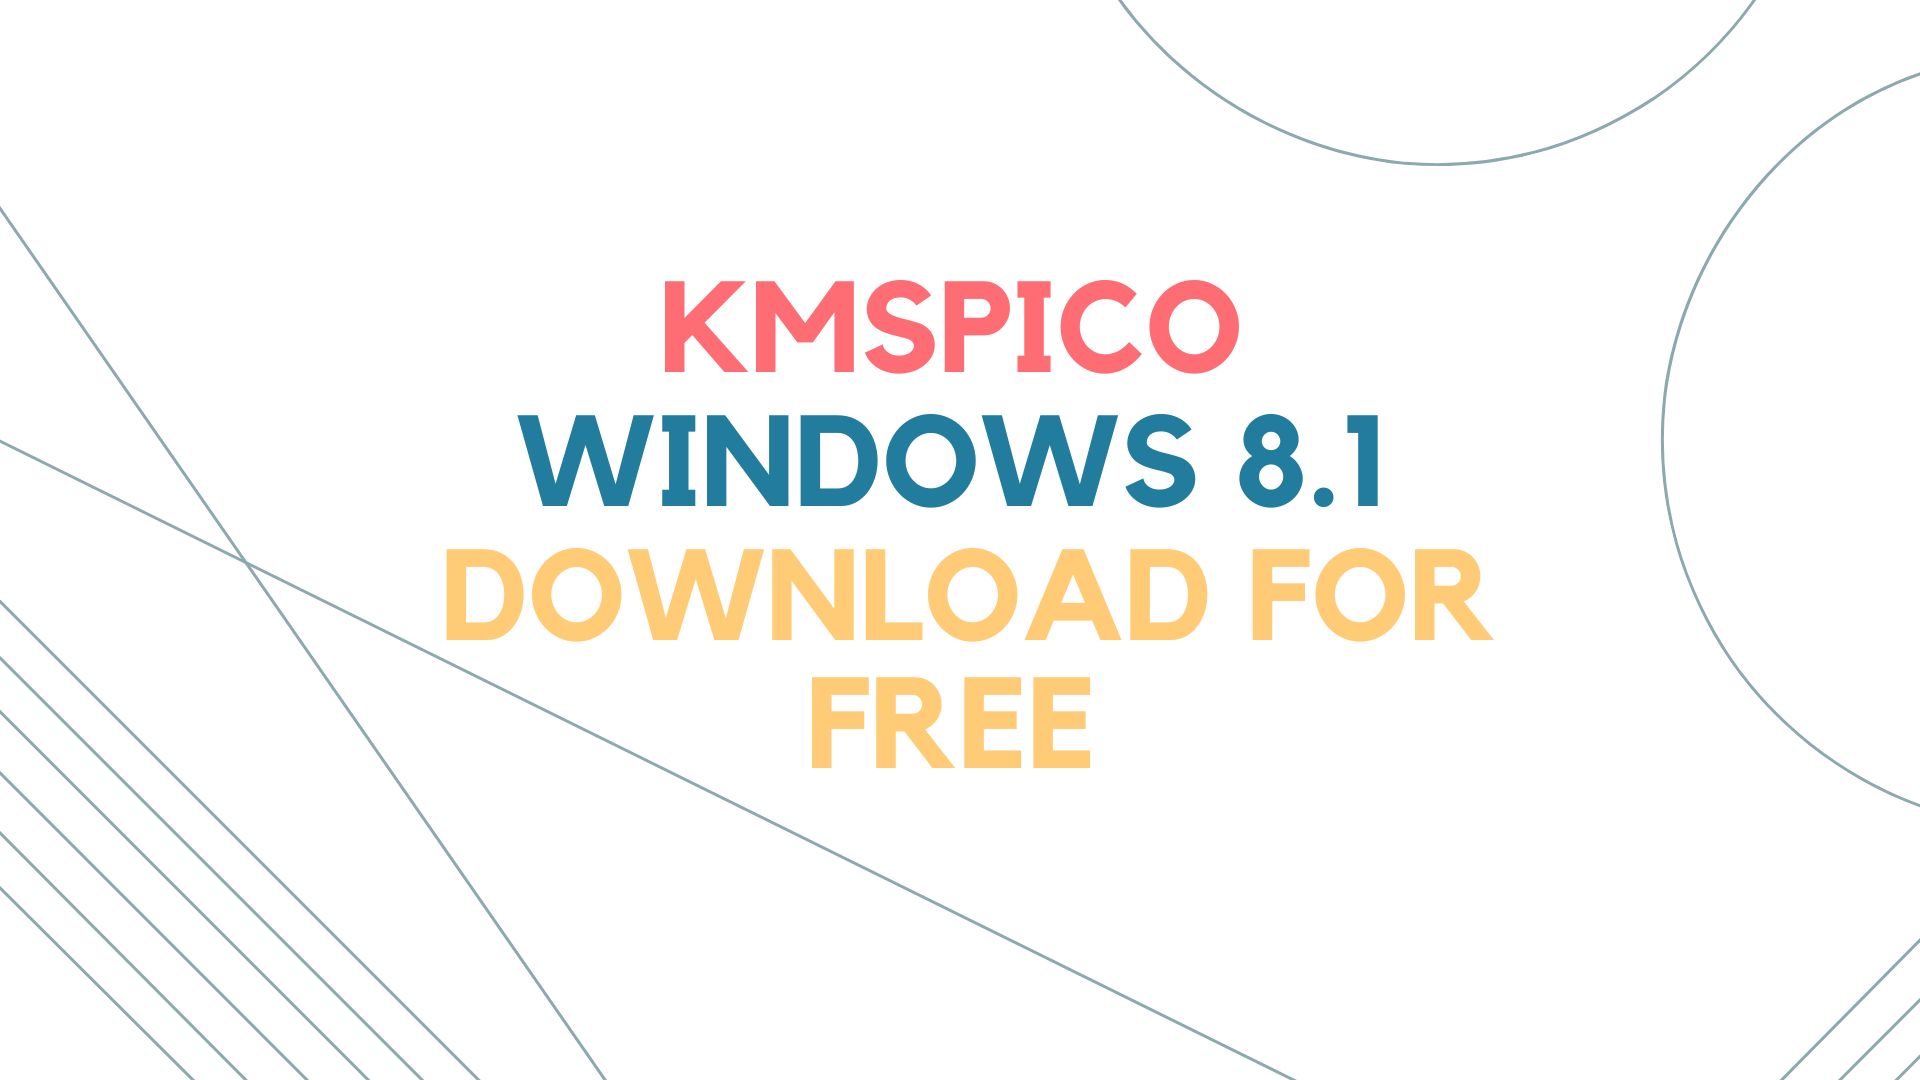 KMSpico Windows 8.1 Download for Free